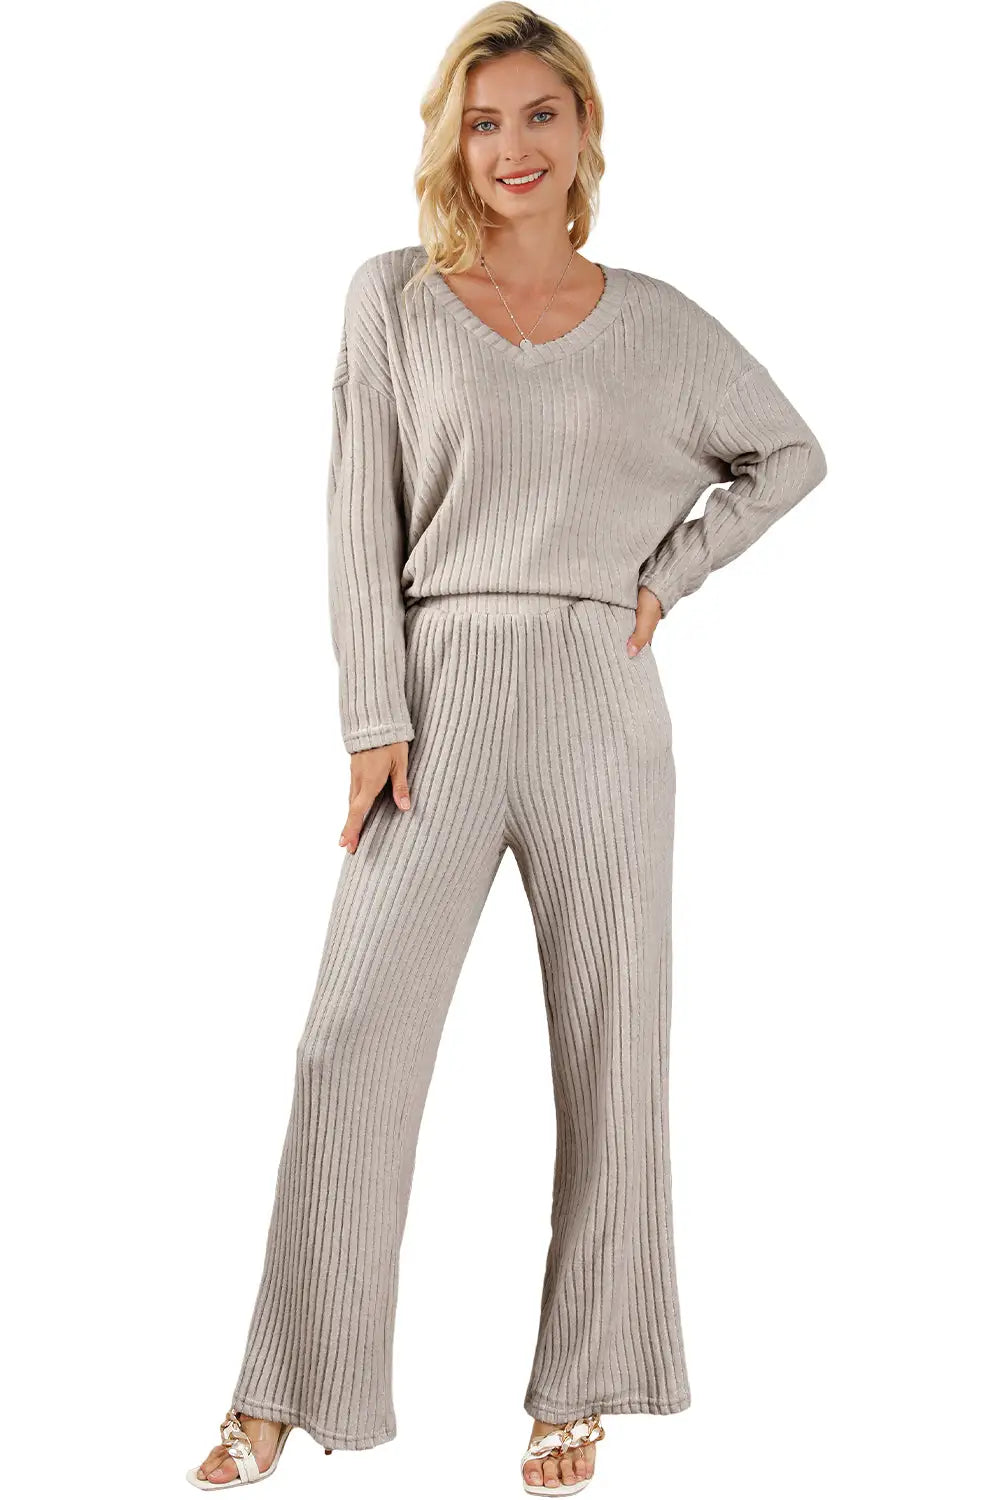 Khaki ribbed knit v neck slouchy two-piece outfit - loungewear